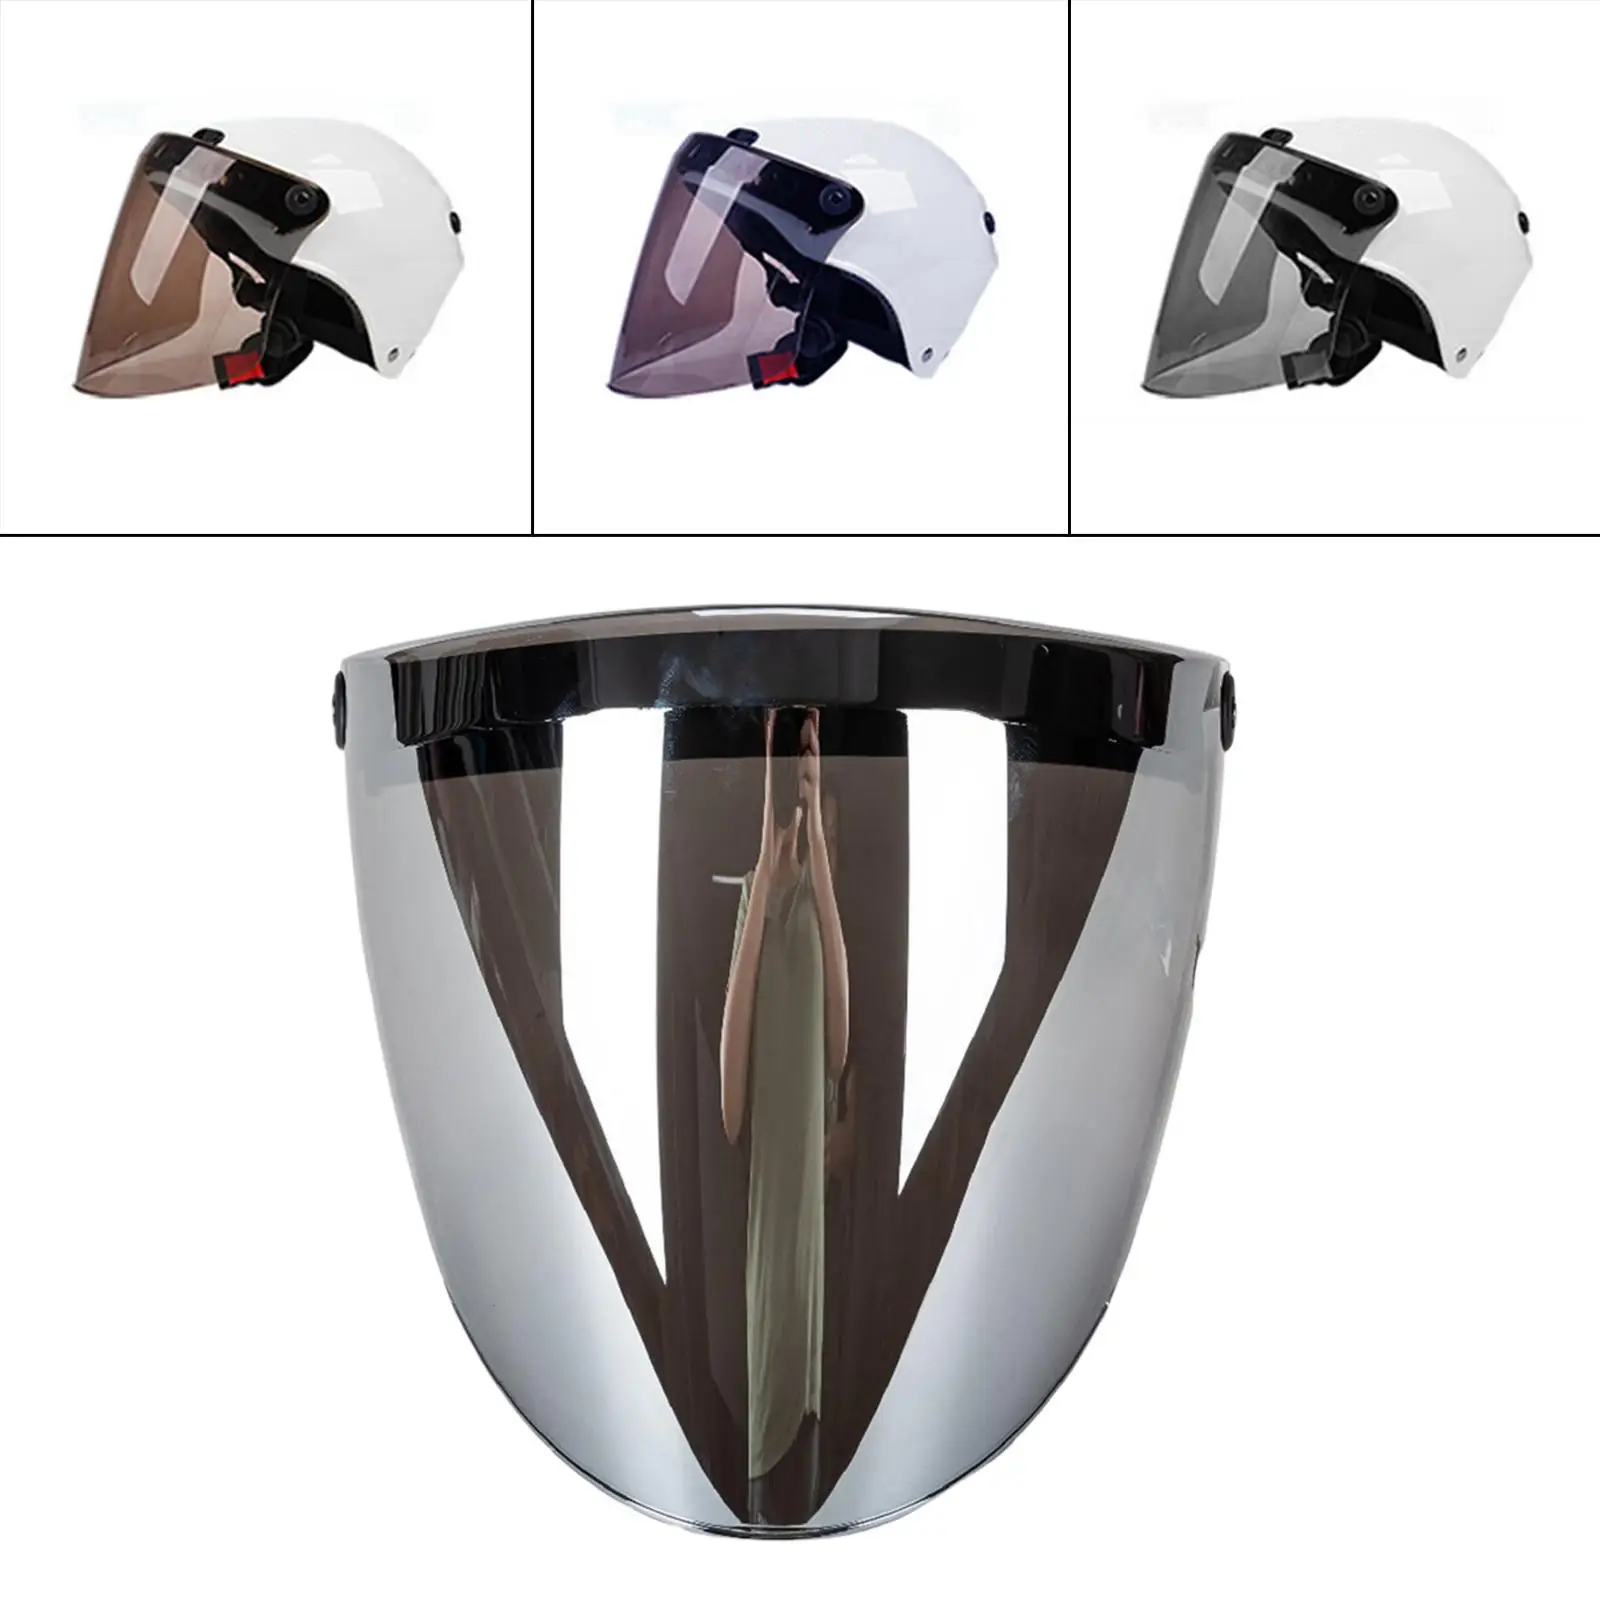 Motorcycle  Visor High Strength PC  Retro Windproof  Fits Snap Easy to Install Professional